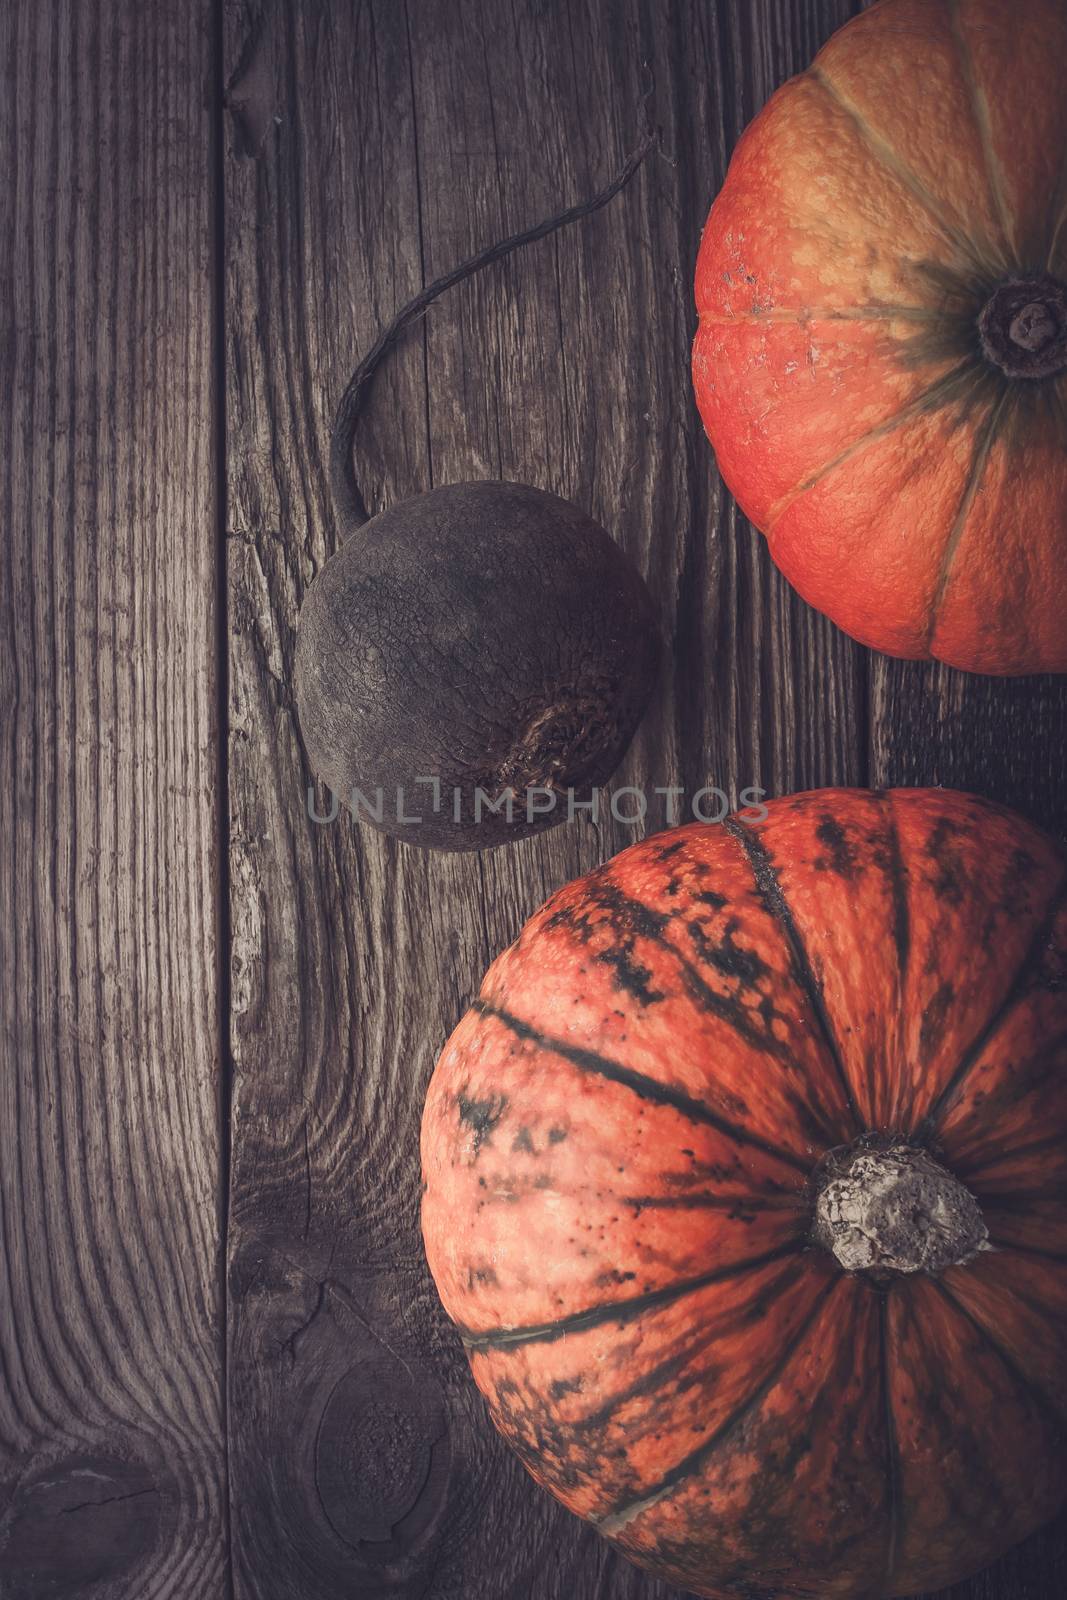 Turnip and two pumpkins on the wooden table